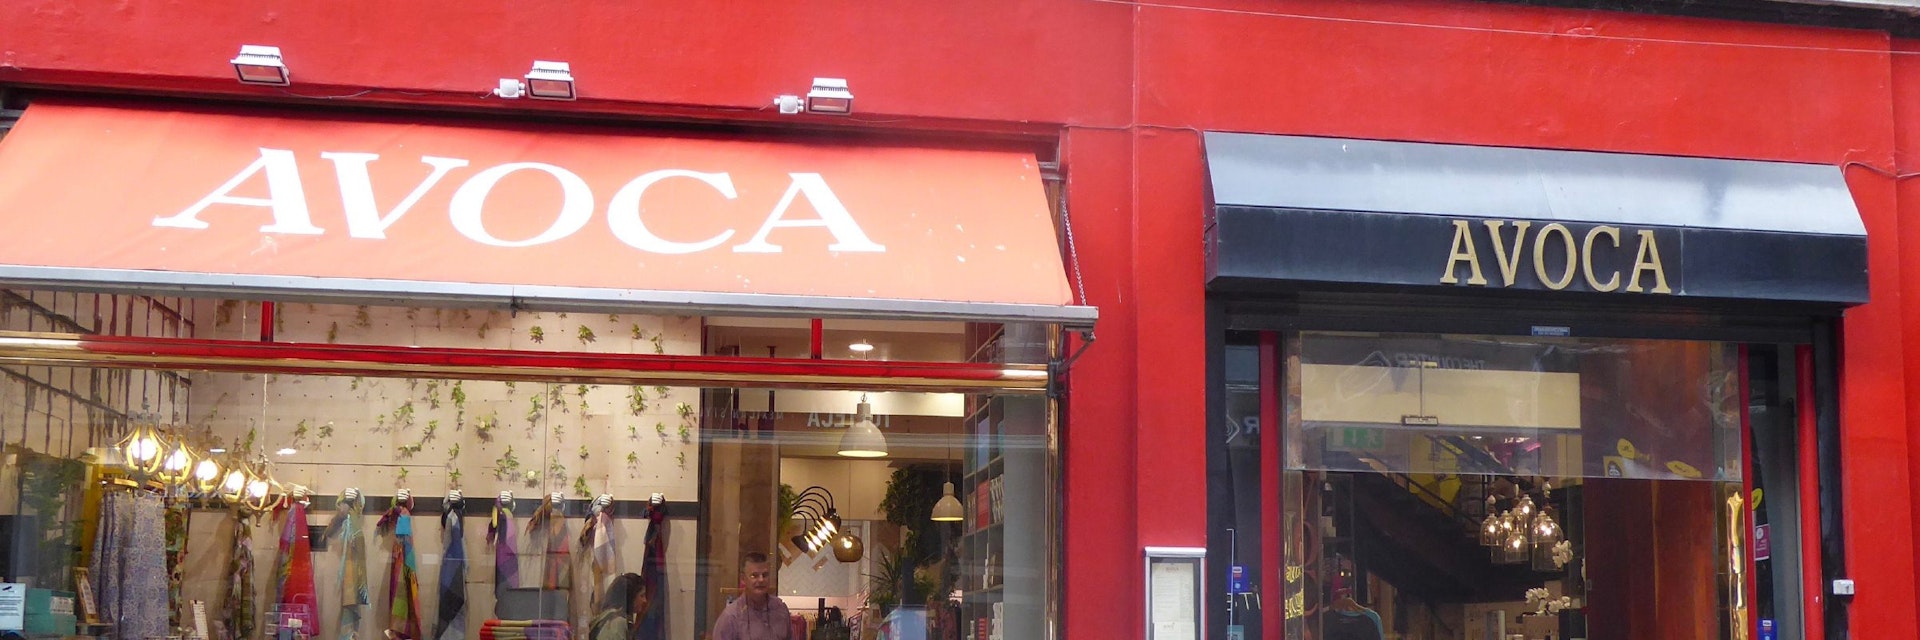 Avoca outside sign from across the road